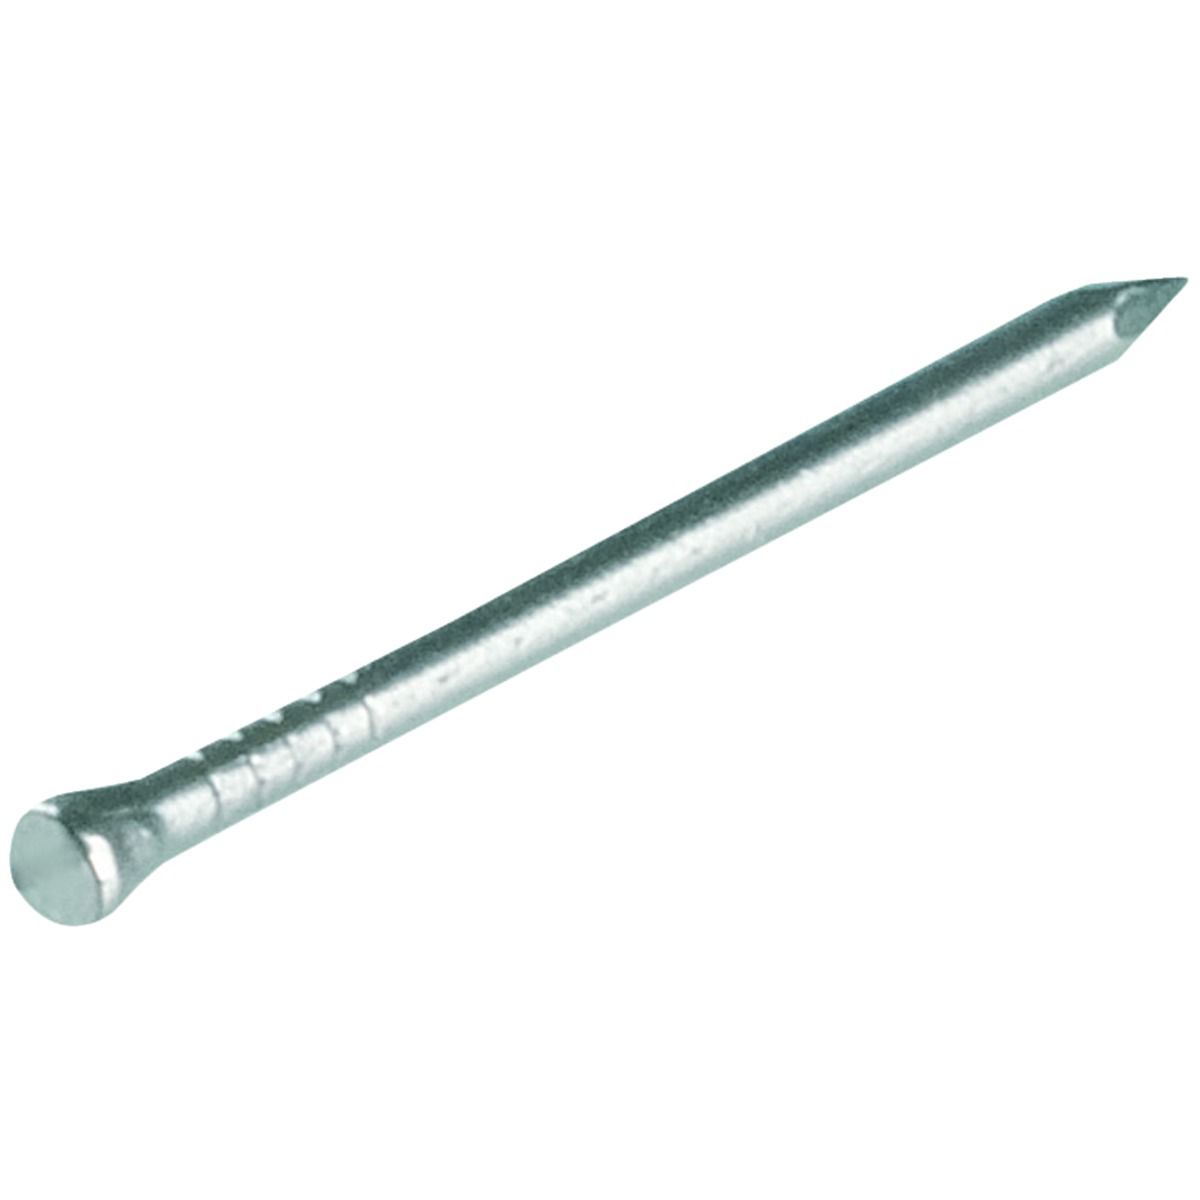 Image of Wickes 30mm Stainless Steel Panel Pins - 100g